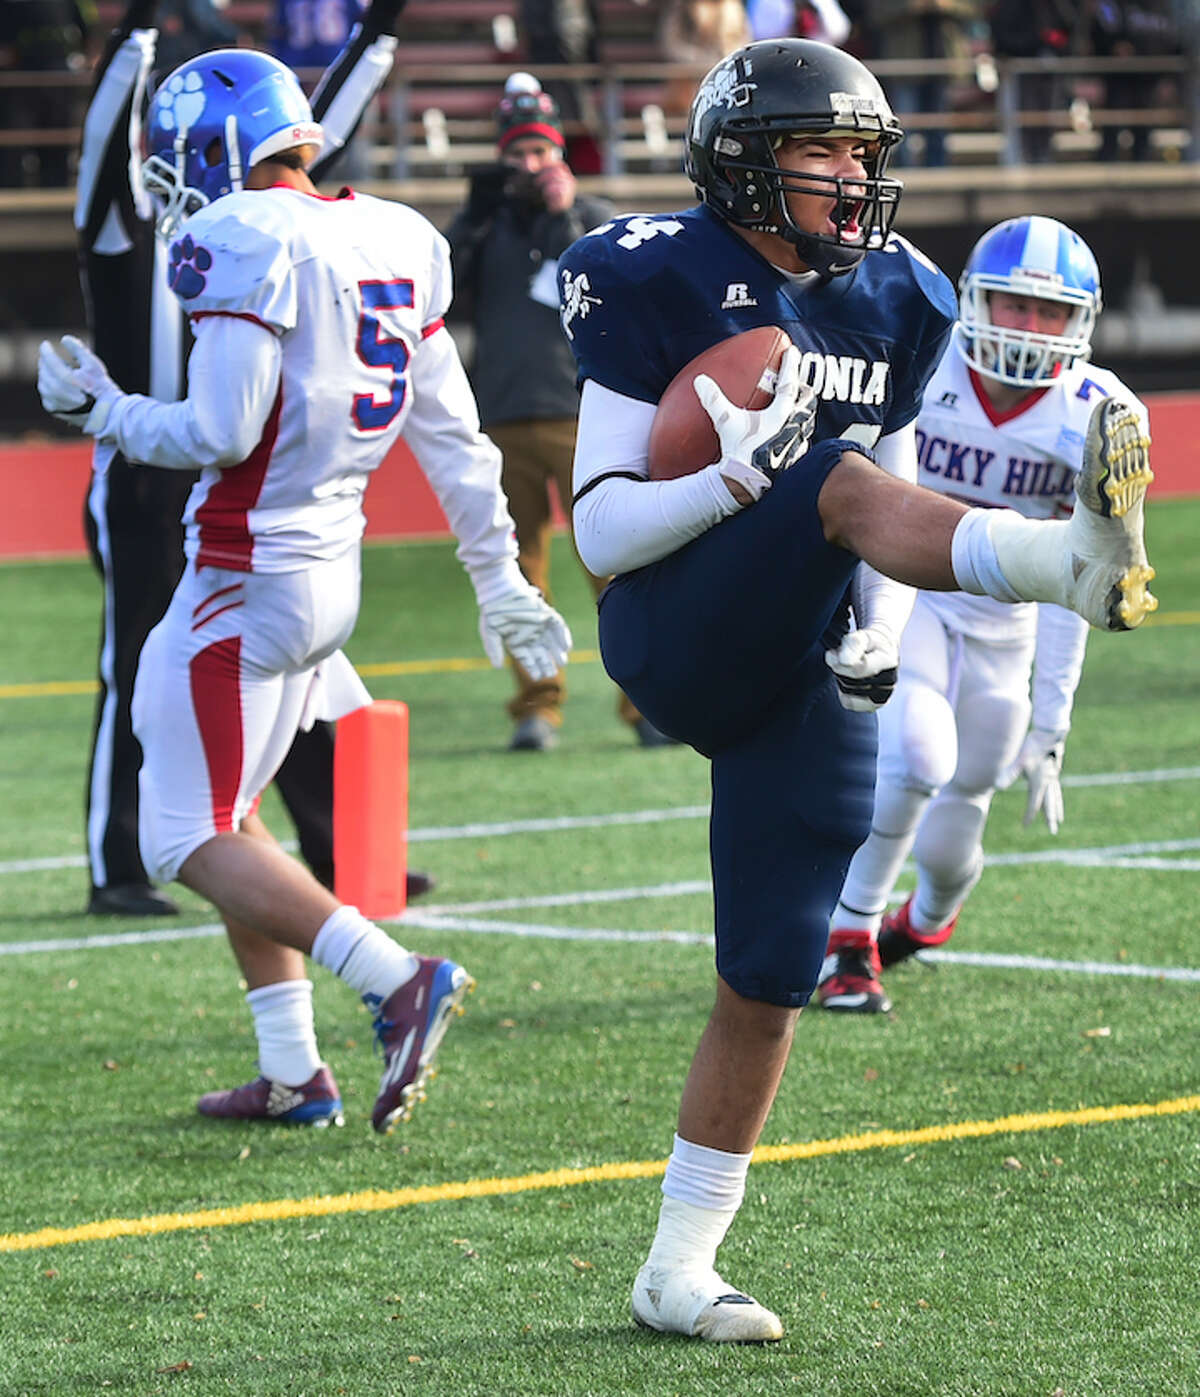 Ansonia’s Jake Butler celebrates a fourth quarter 20-yard touchdown pass reception for a go-ahead touchdown as it defeats Rocky Hill 28-21 for its 20th state football championship  Saturday, December 10, 2016 at New Britain Stadium in New Britain, Connecticut. (Peter Hvizdak – New Haven Register)